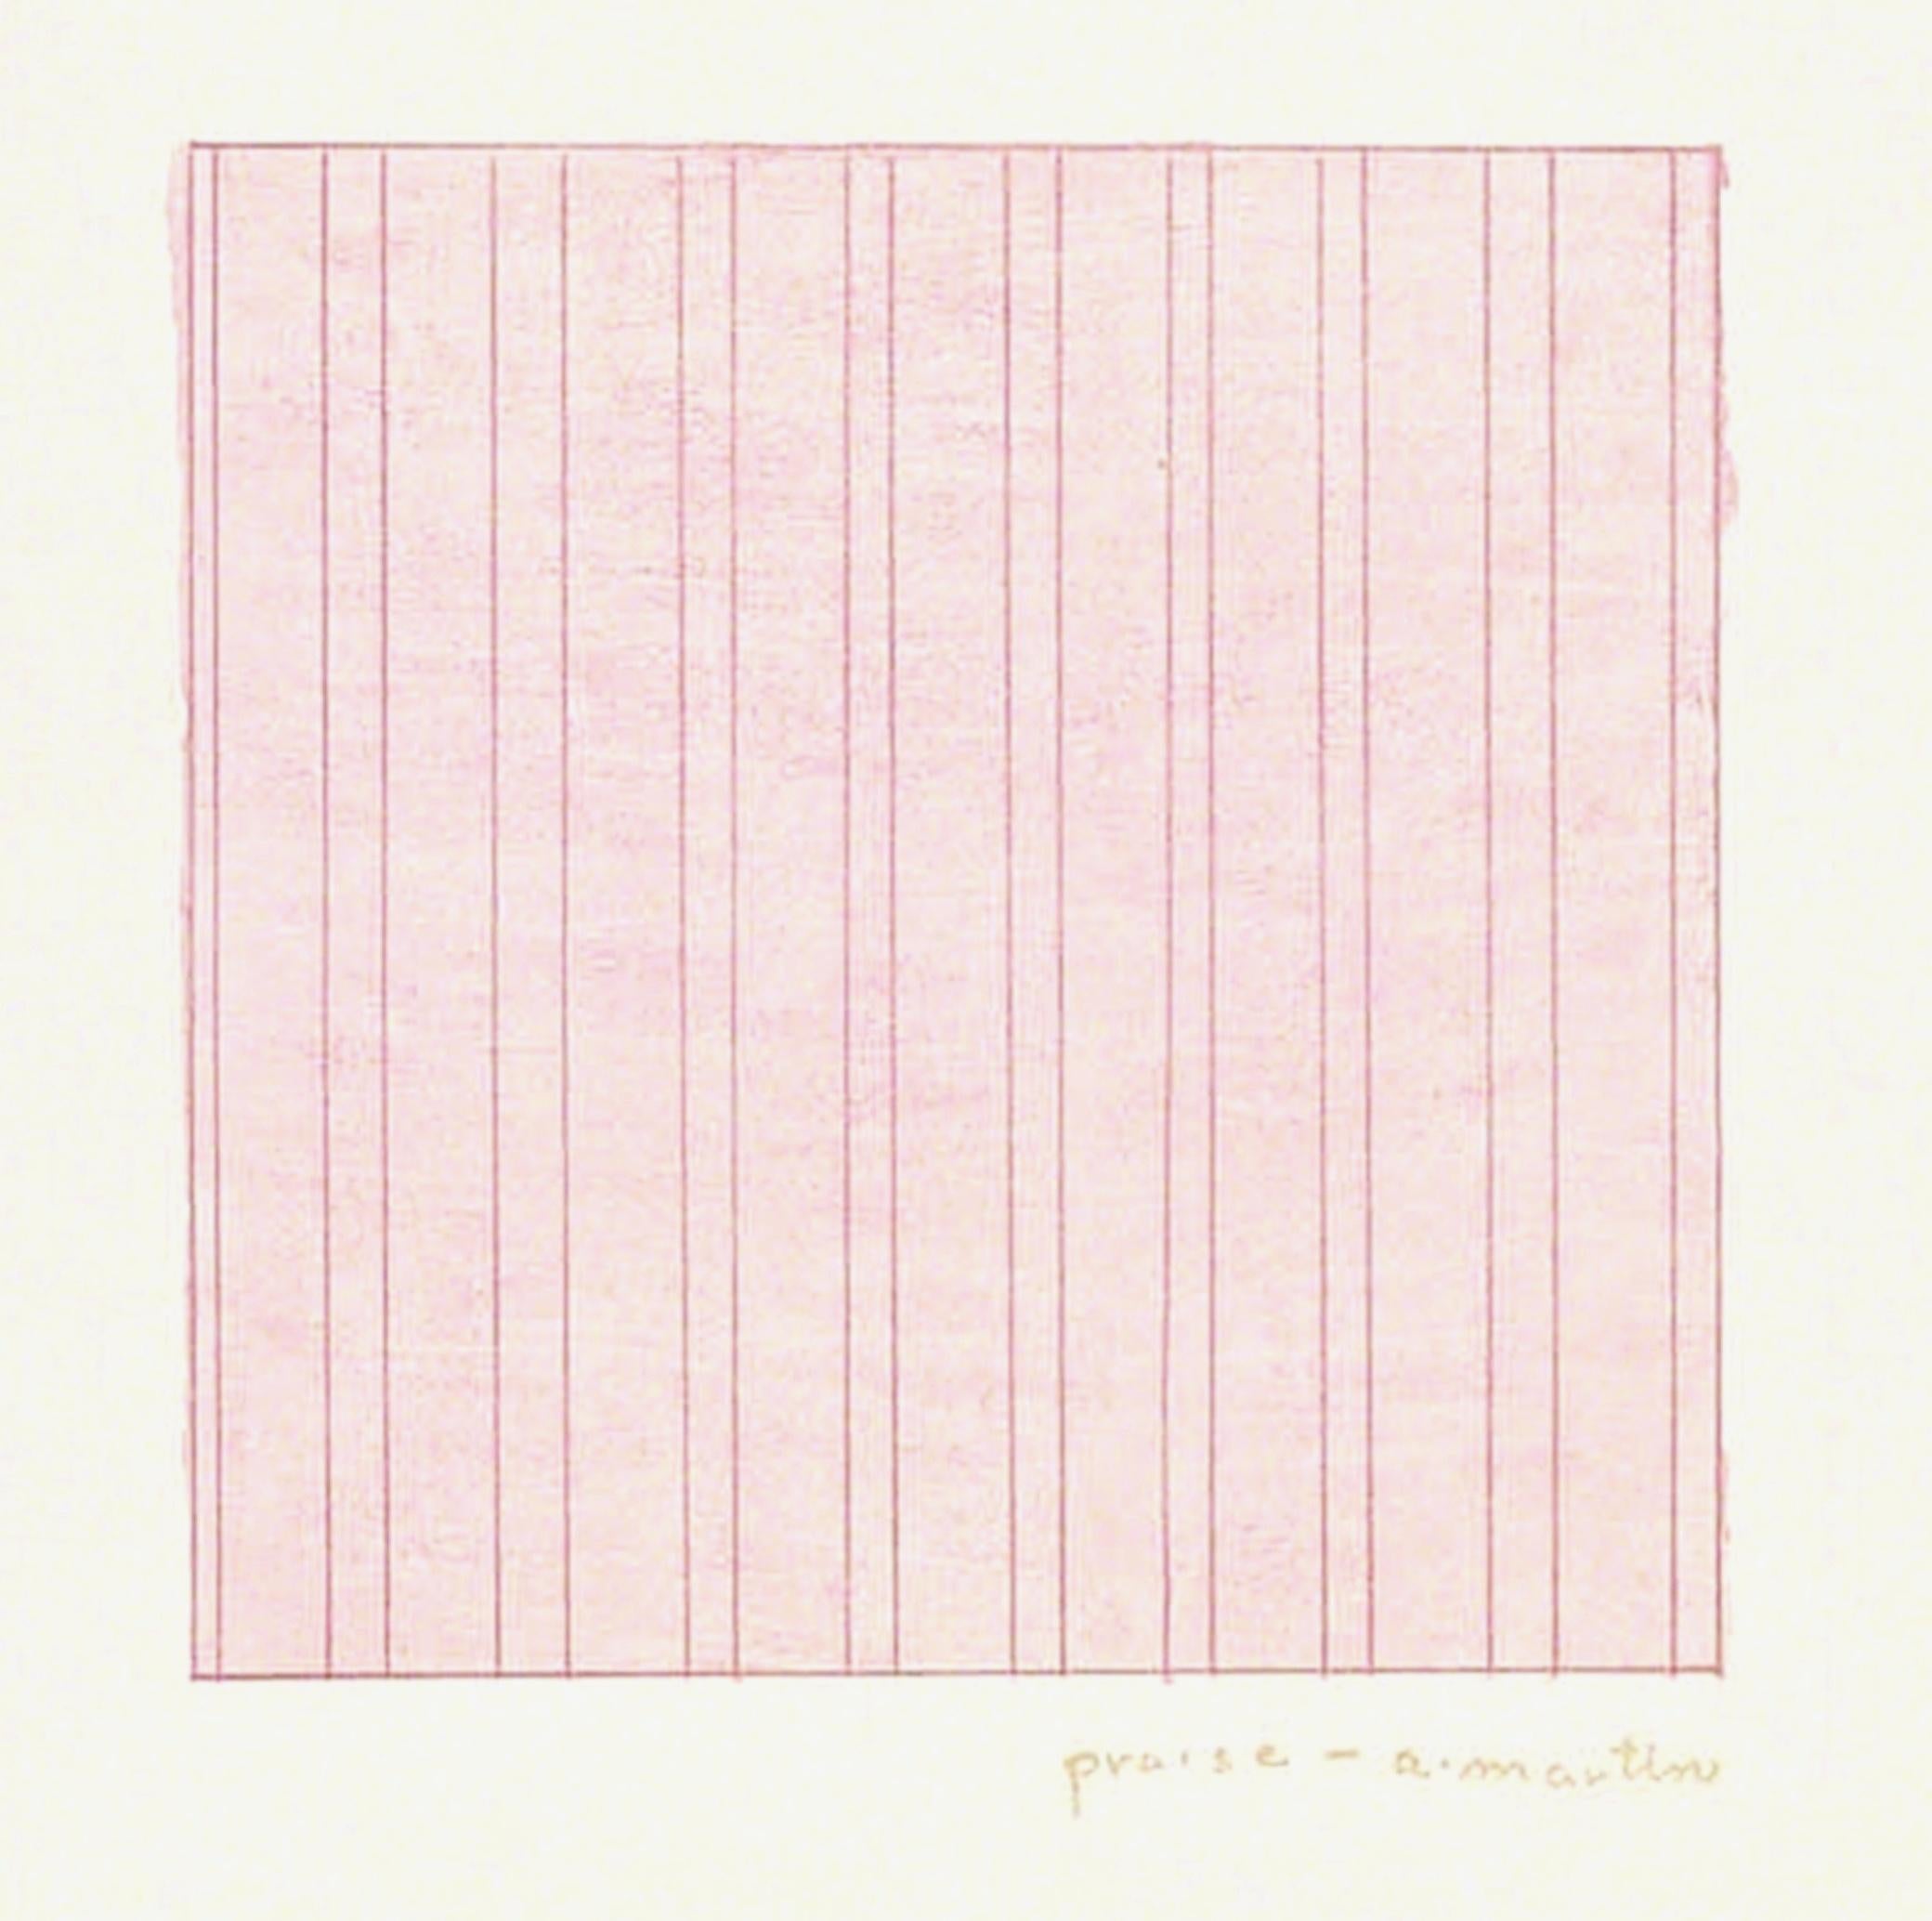 Why did Agnes Martin paint?